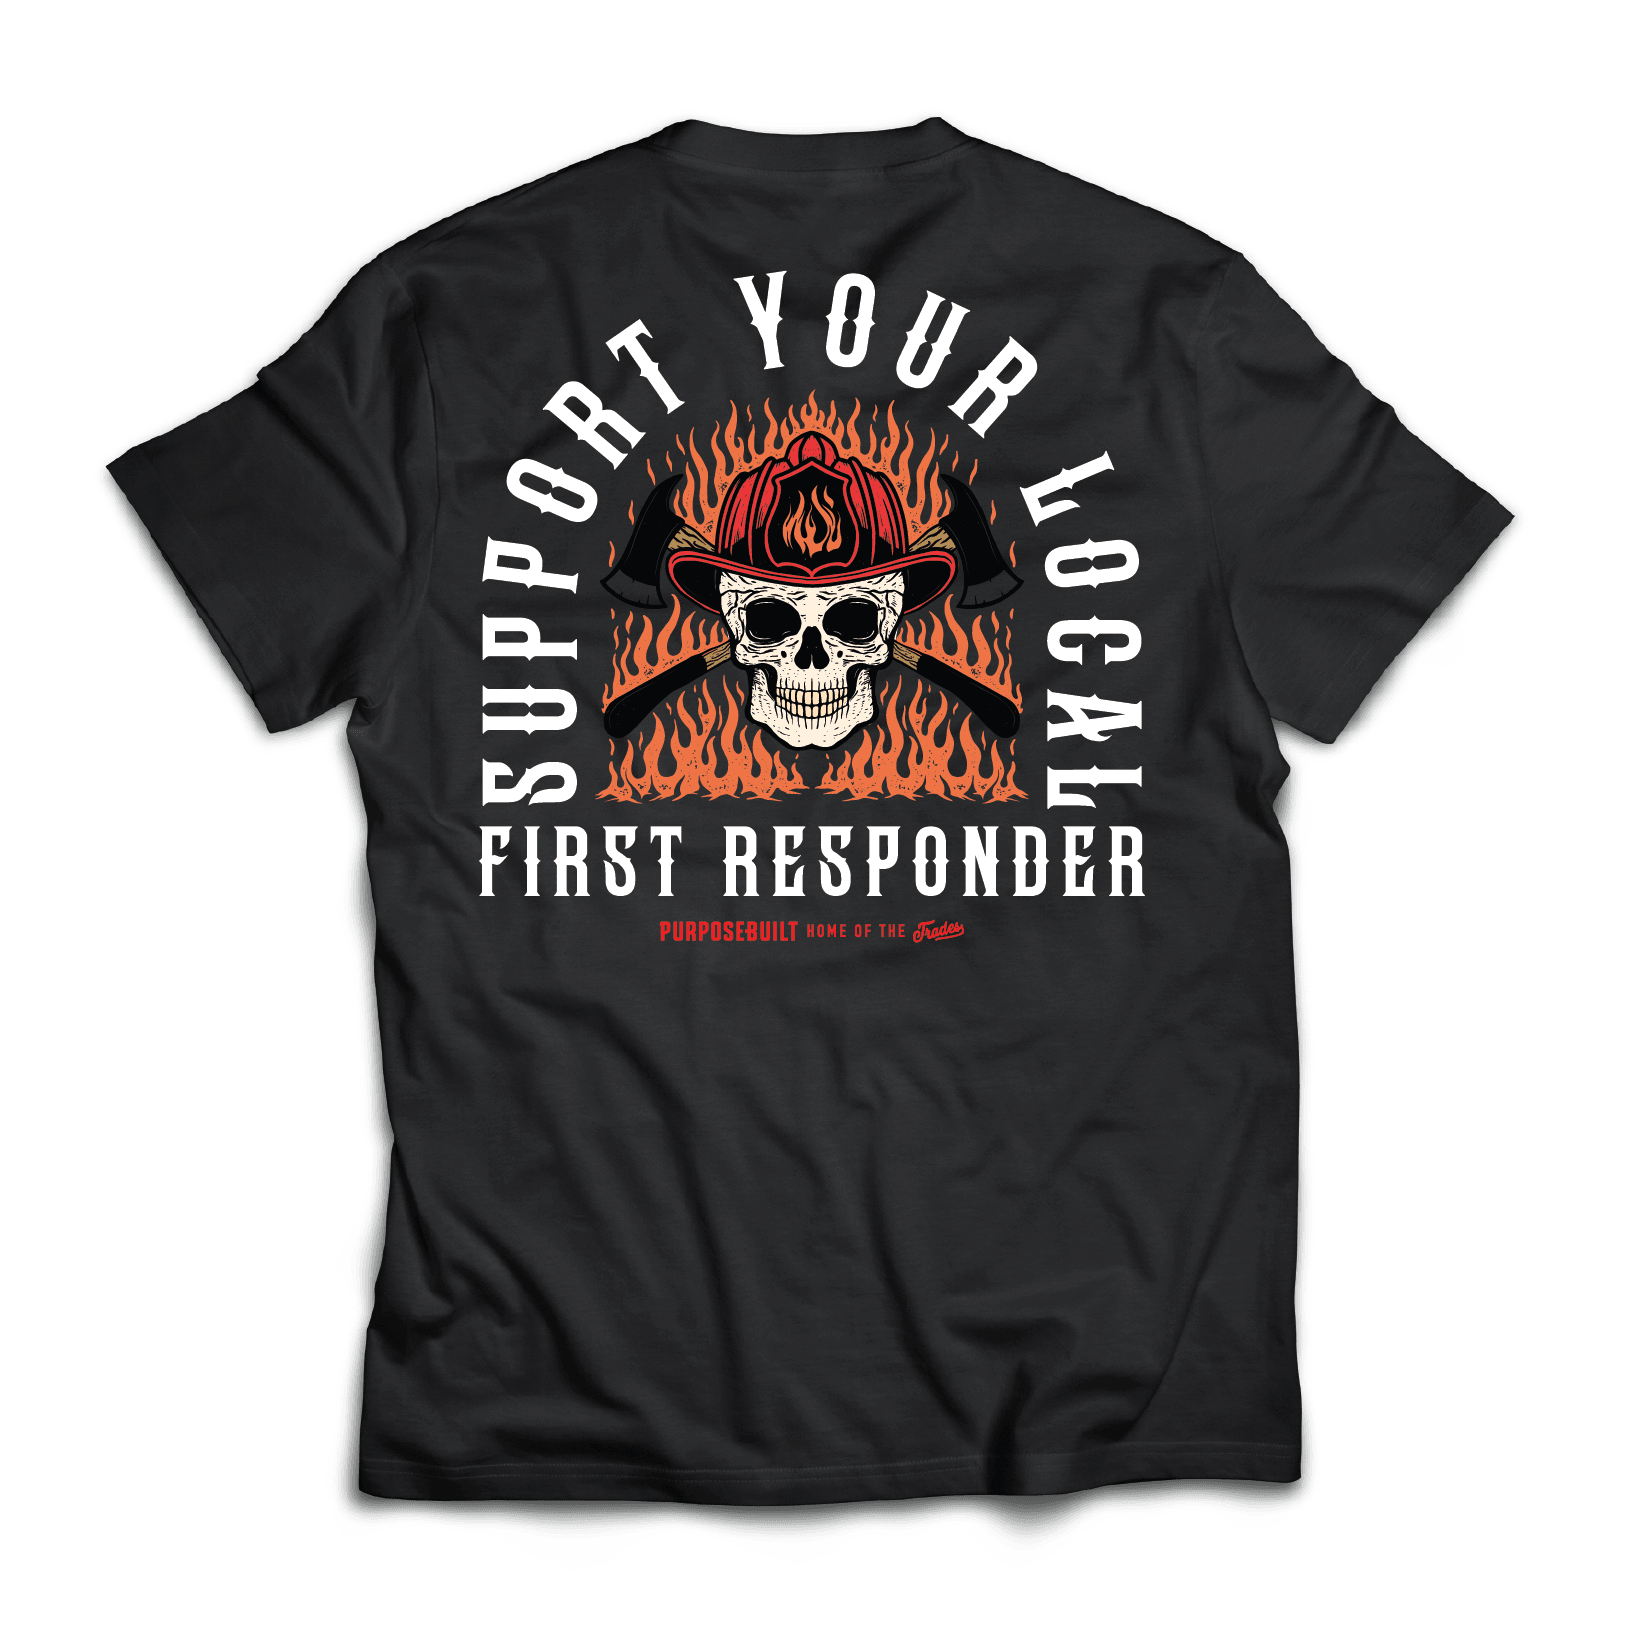 Support Your Local First Responder Tee. Black - Purpose-Built / Home of the Trades